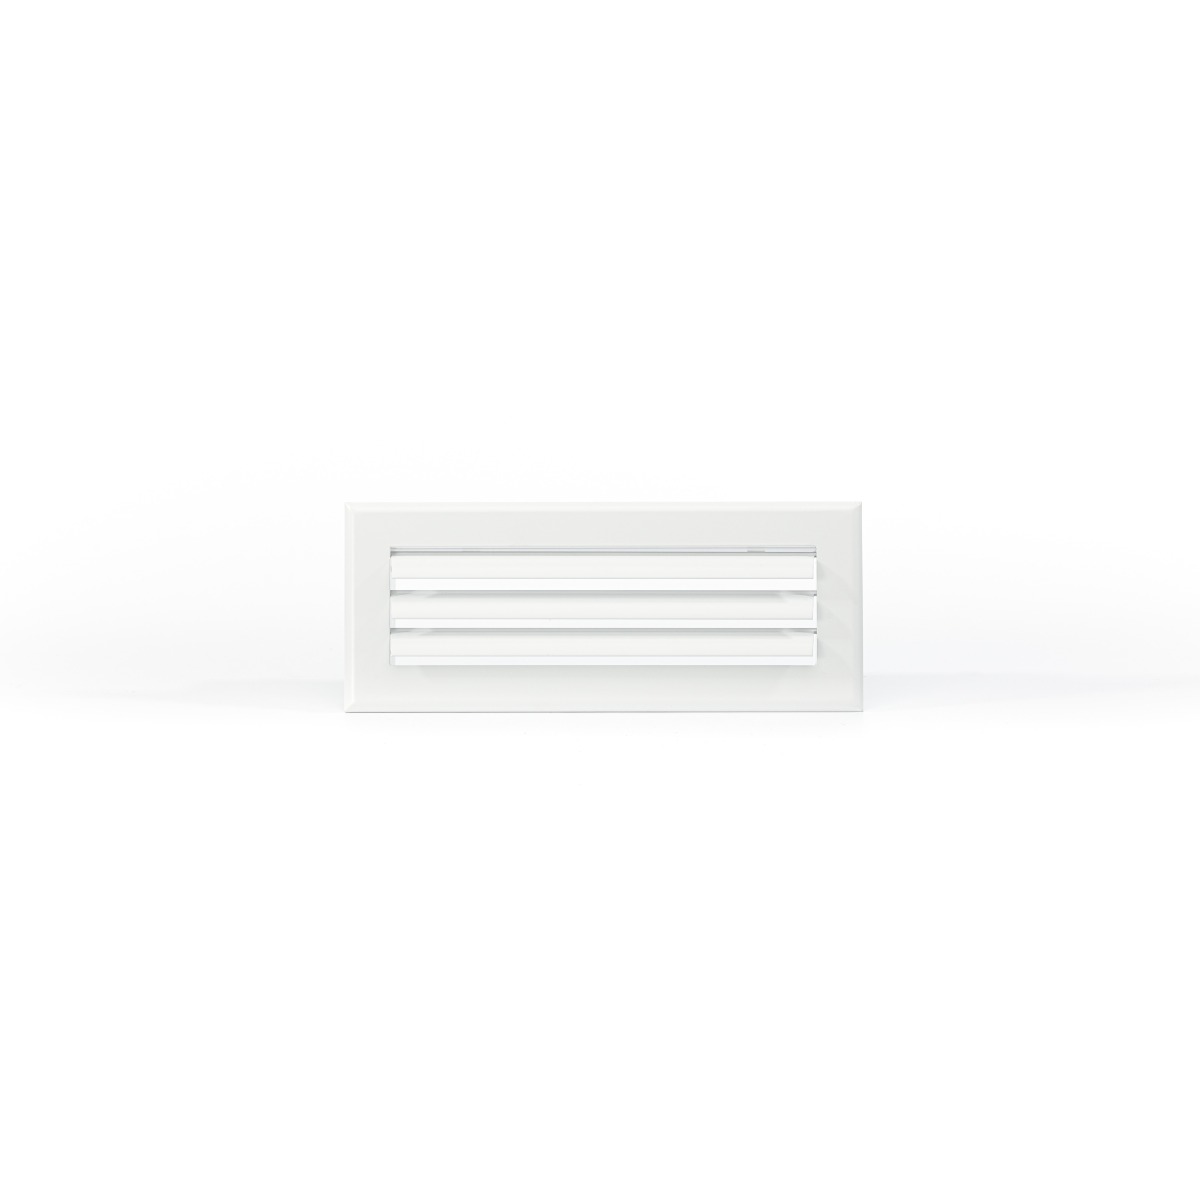 Grille lame courbe 300x100 blanc mat